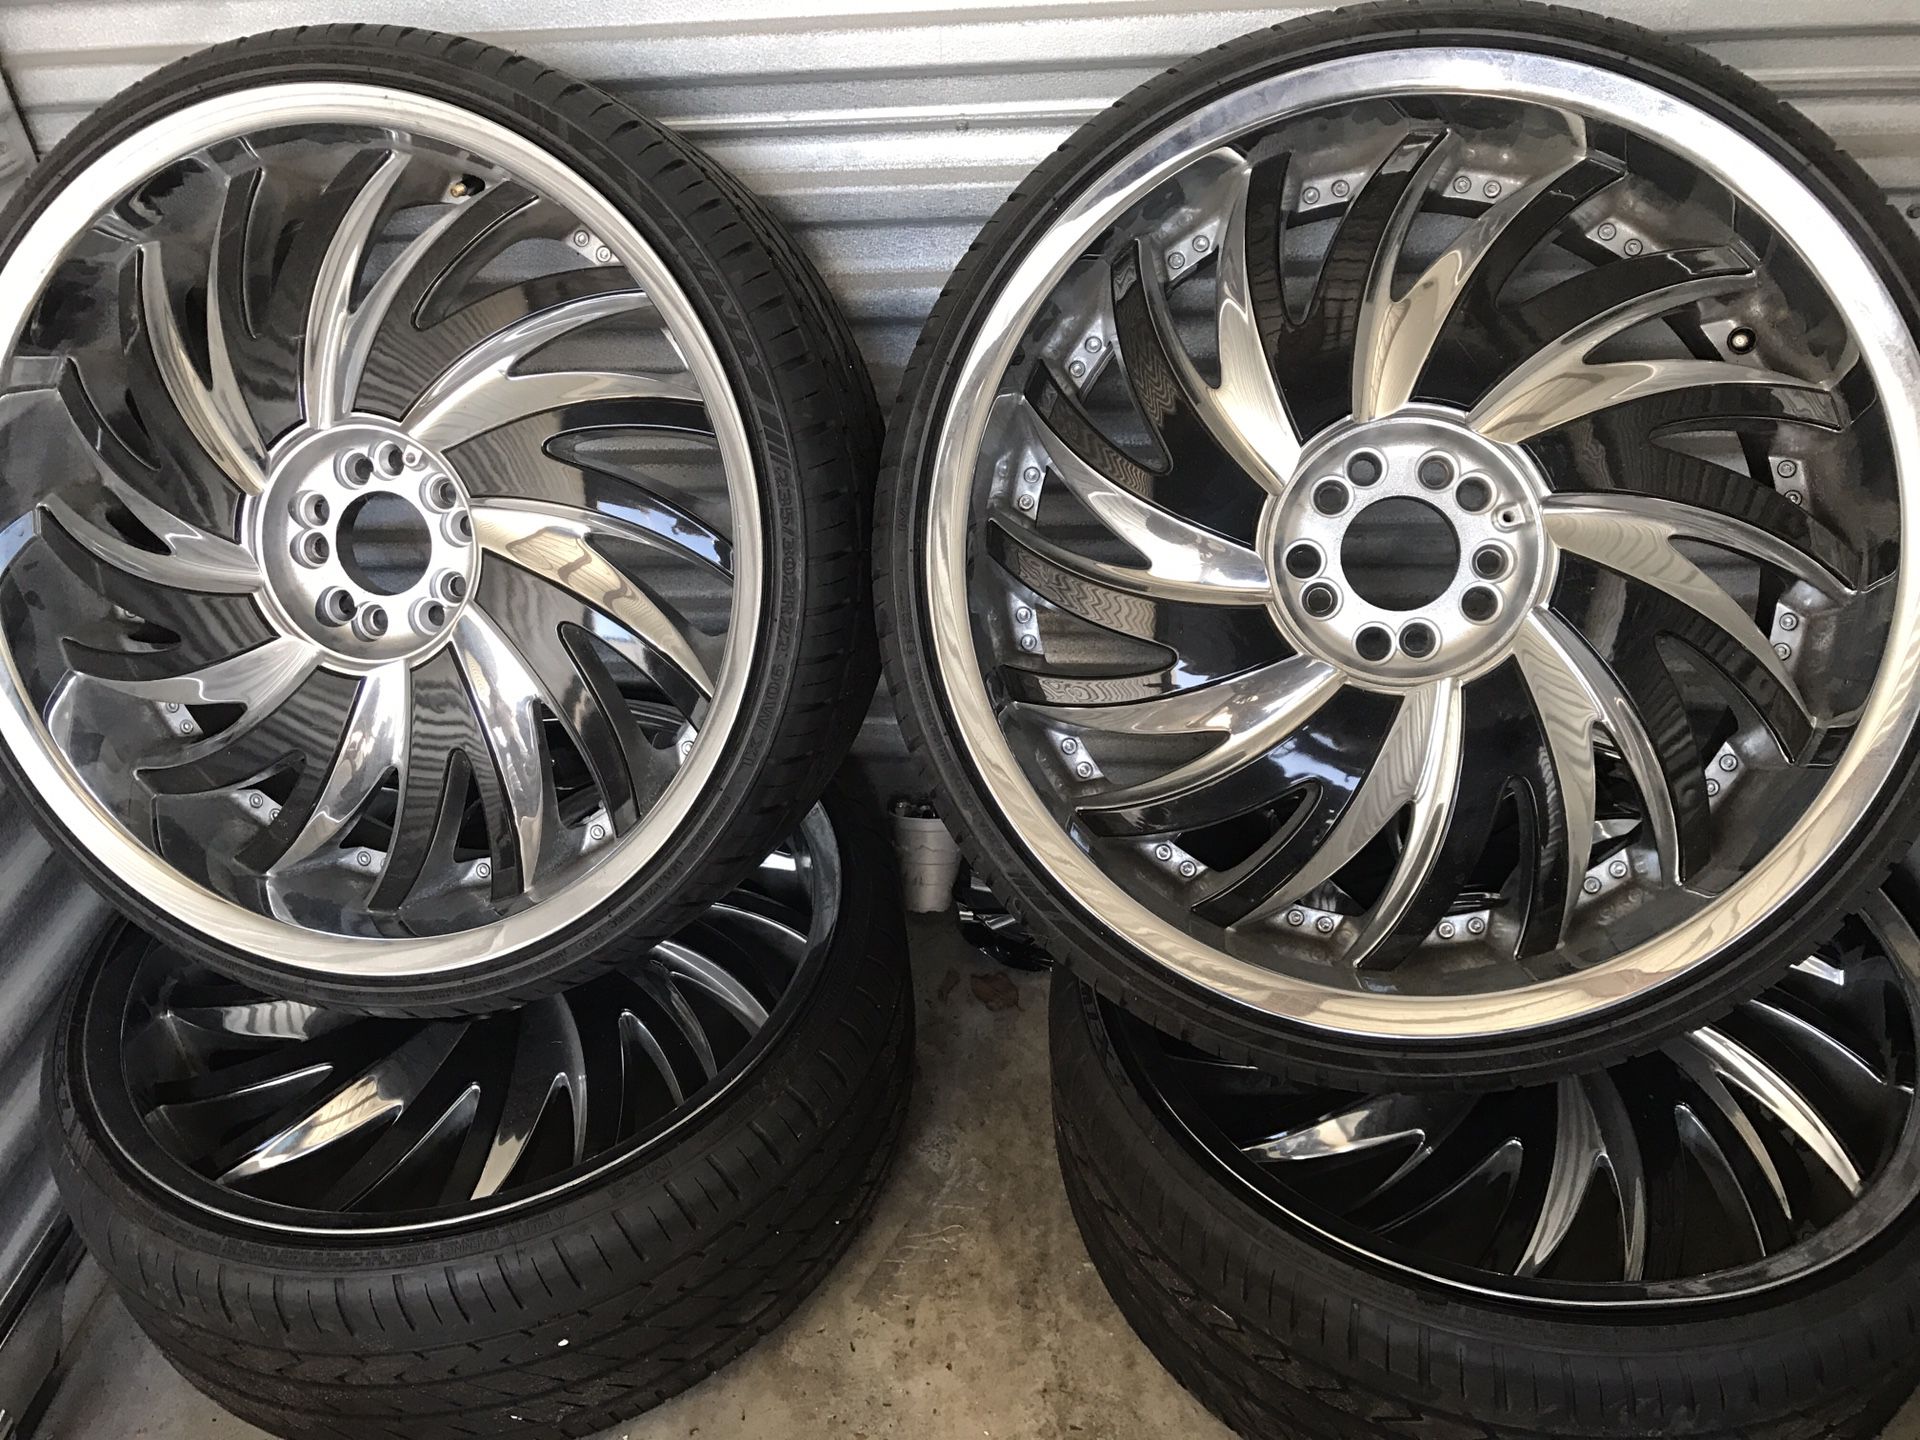 22 inch rims and tires Universal fit